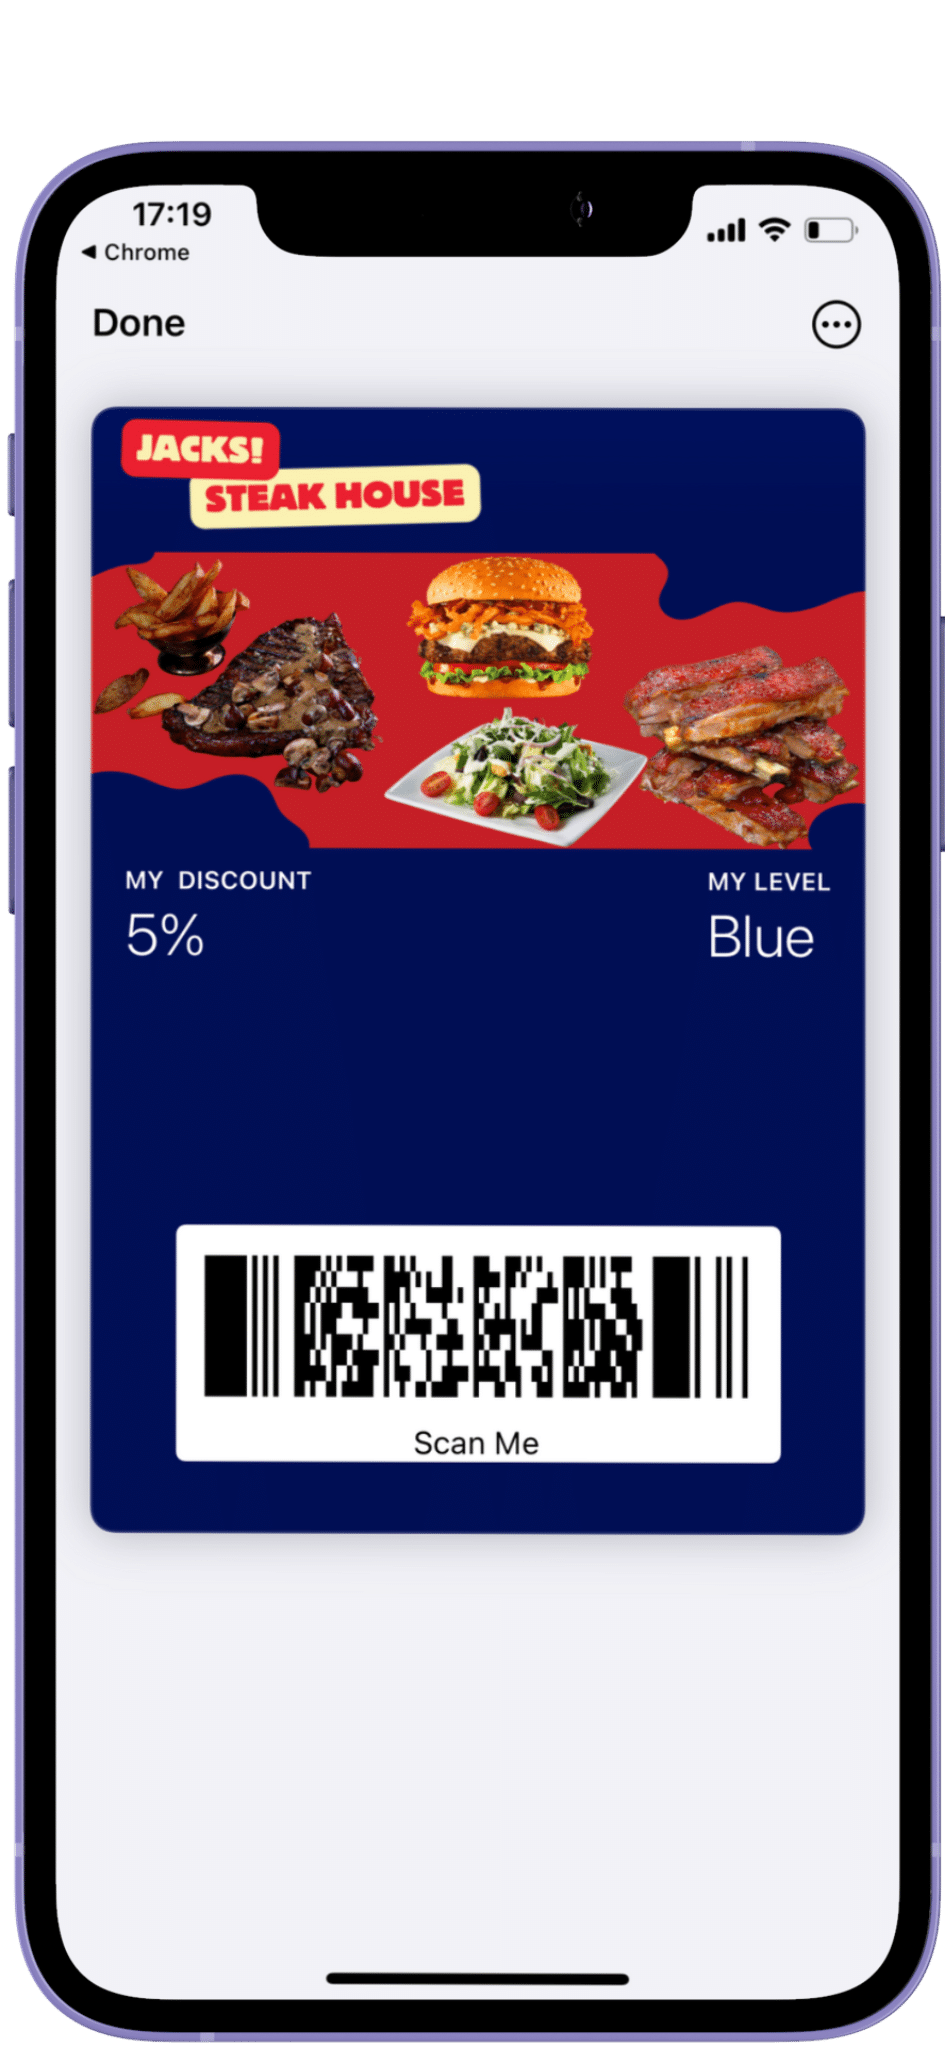 A mobile screen displaying a digital loyalty card for "jack's steak house" with a 5% discount, membership level 'blue,' and a barcode to be scanned.